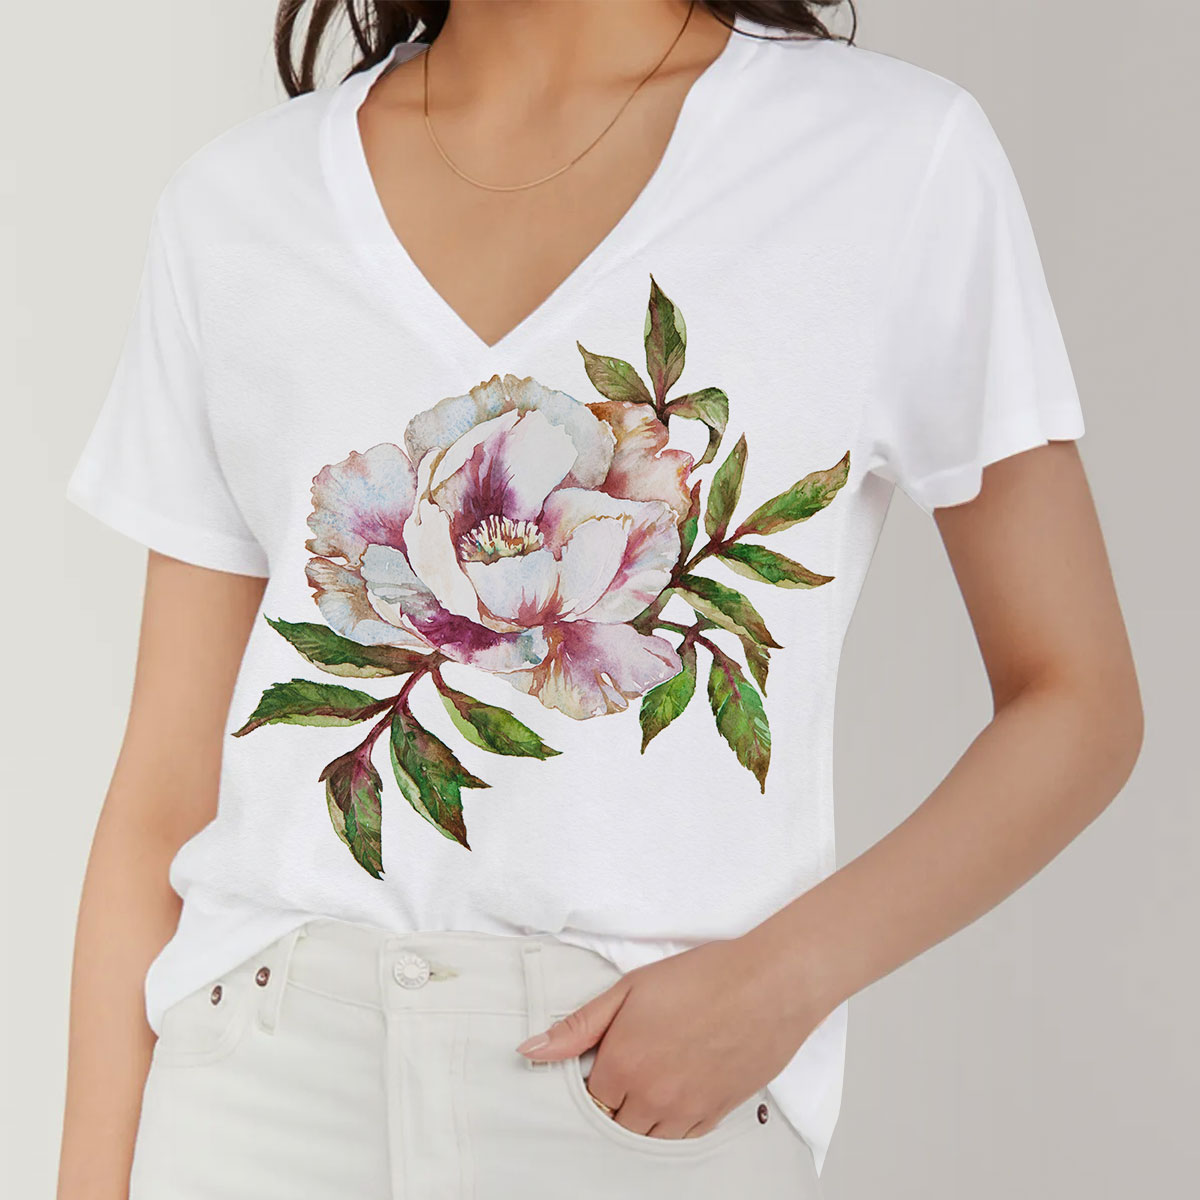 Peony Flower With Leaves V-Neck Women's T-Shirt